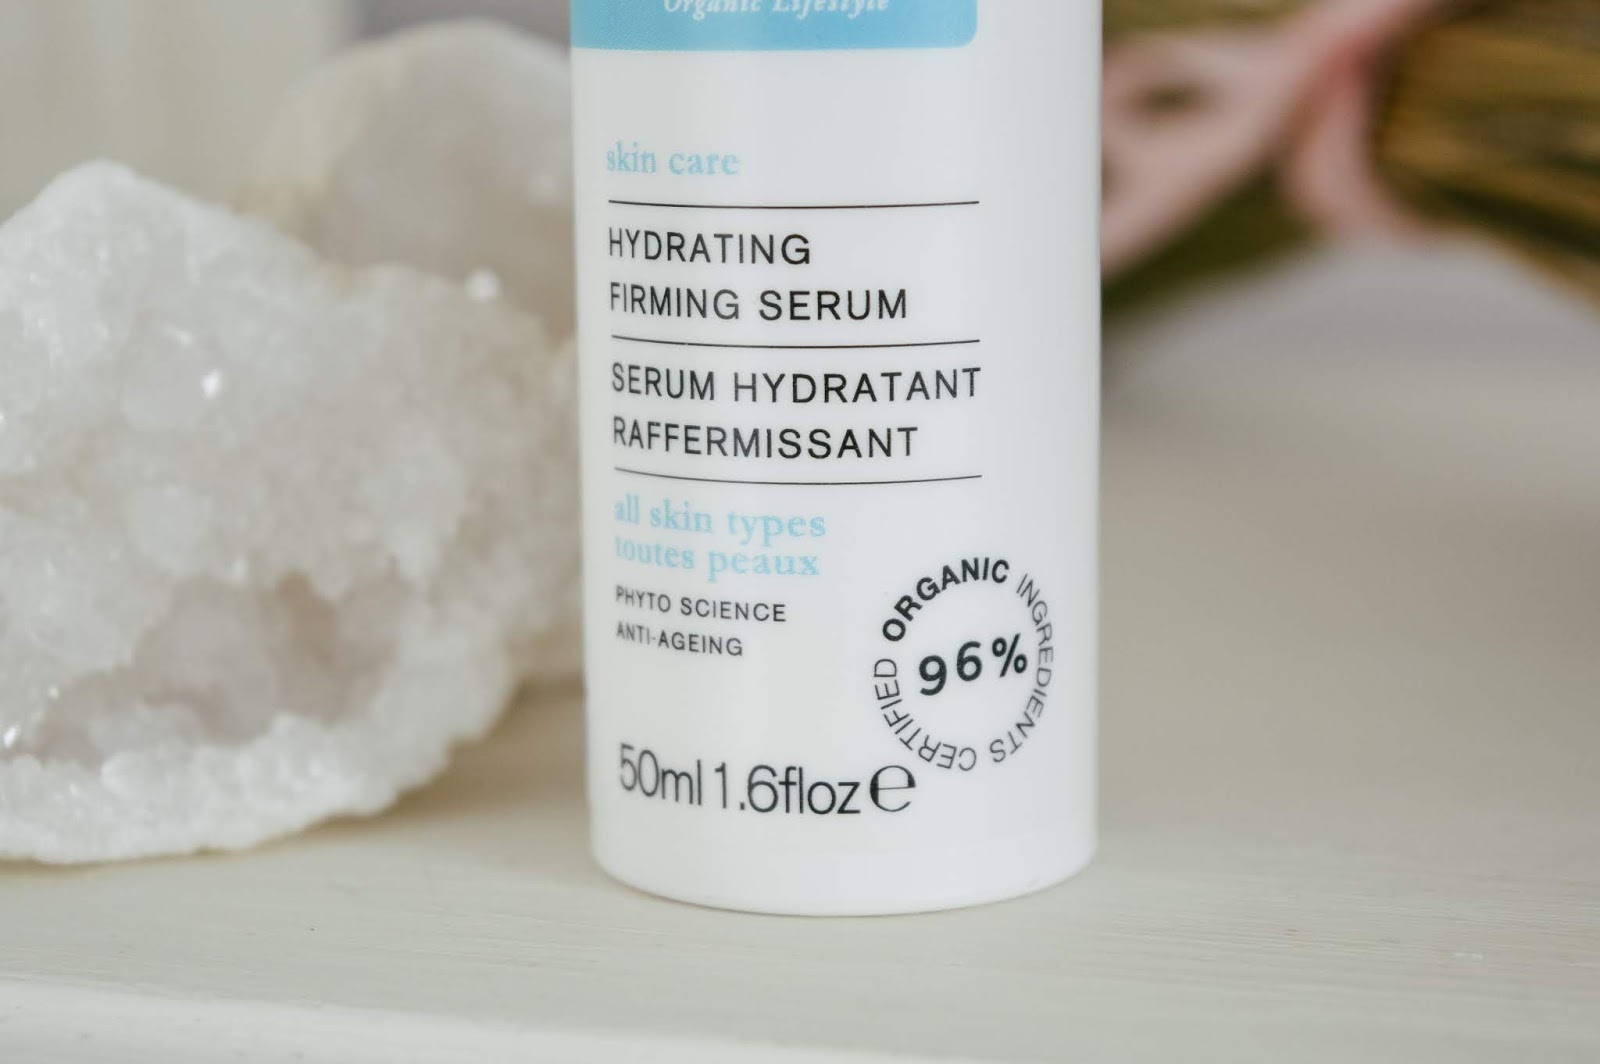 Review of Green People organic skincare - hydrating firming serum for sensitive skin